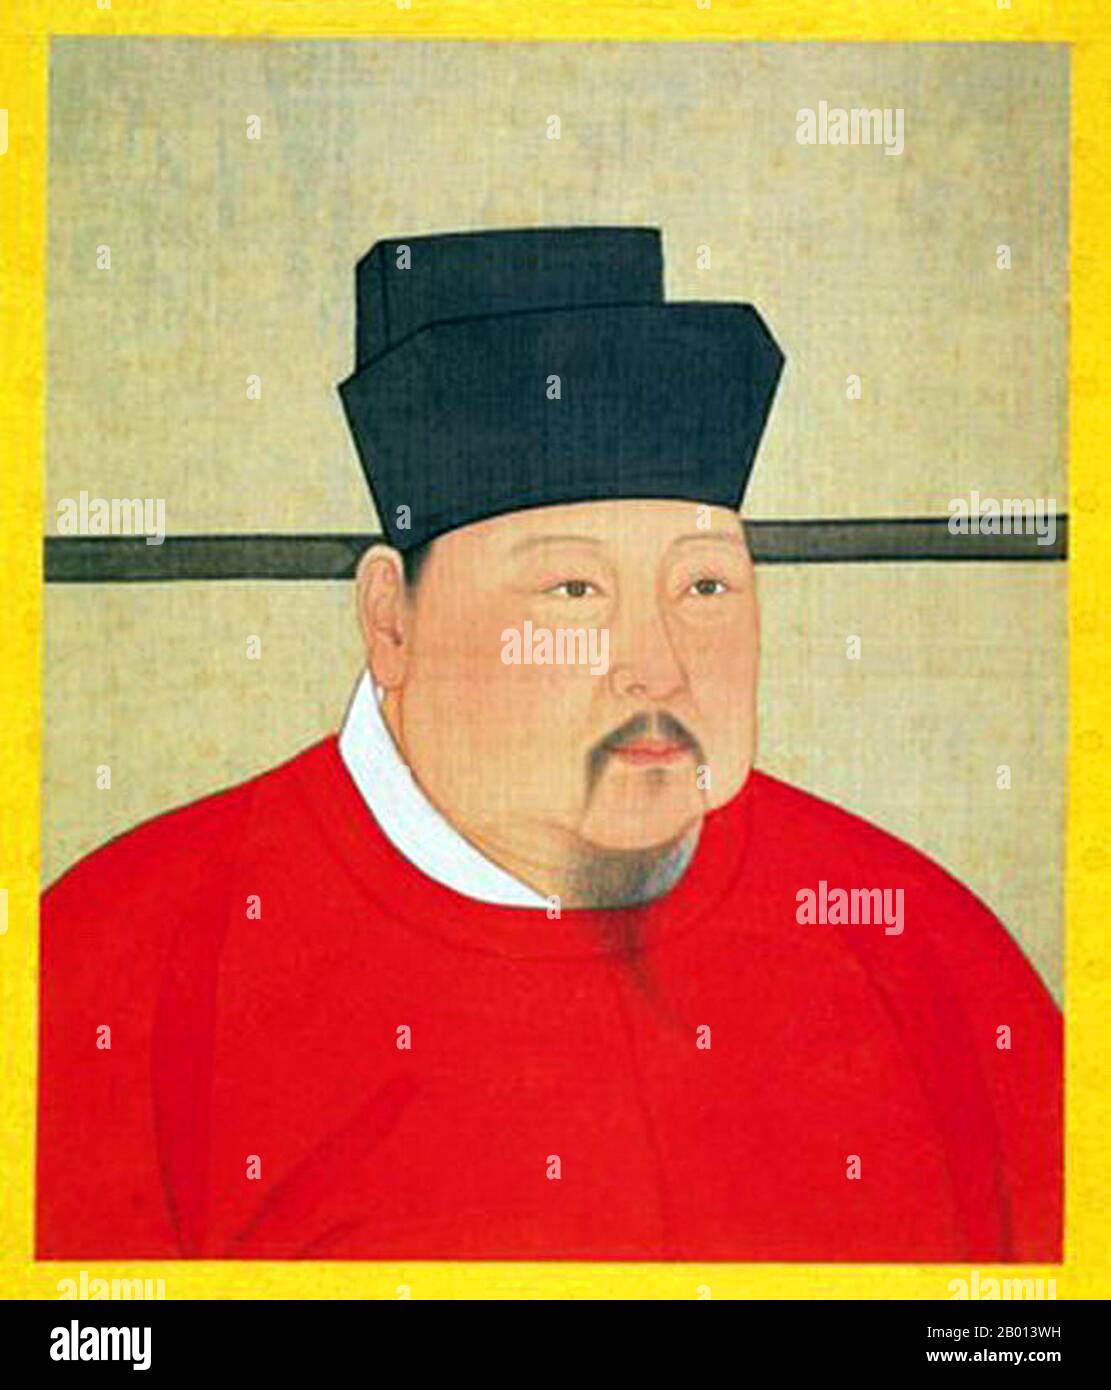 China: Emperor Zhengzong (Zhao Heng, 23 December 968 - 23 March 1022), 3rd ruler of the (Northern) Song Dynasty (r. 997-1022). Hanging scroll painting, c. 997-1022.  Zhenzong of Song, personal name Zhao Heng and previously known as Zhao Dechang, Zhao Yuanxiu and Zhao Yuankan, was the third emperor of the Song Dynasty. His reign was noted for the consolidation of power and the strengthening of the dynasty. The country prospered, and its military might was further reinforced. Stock Photo